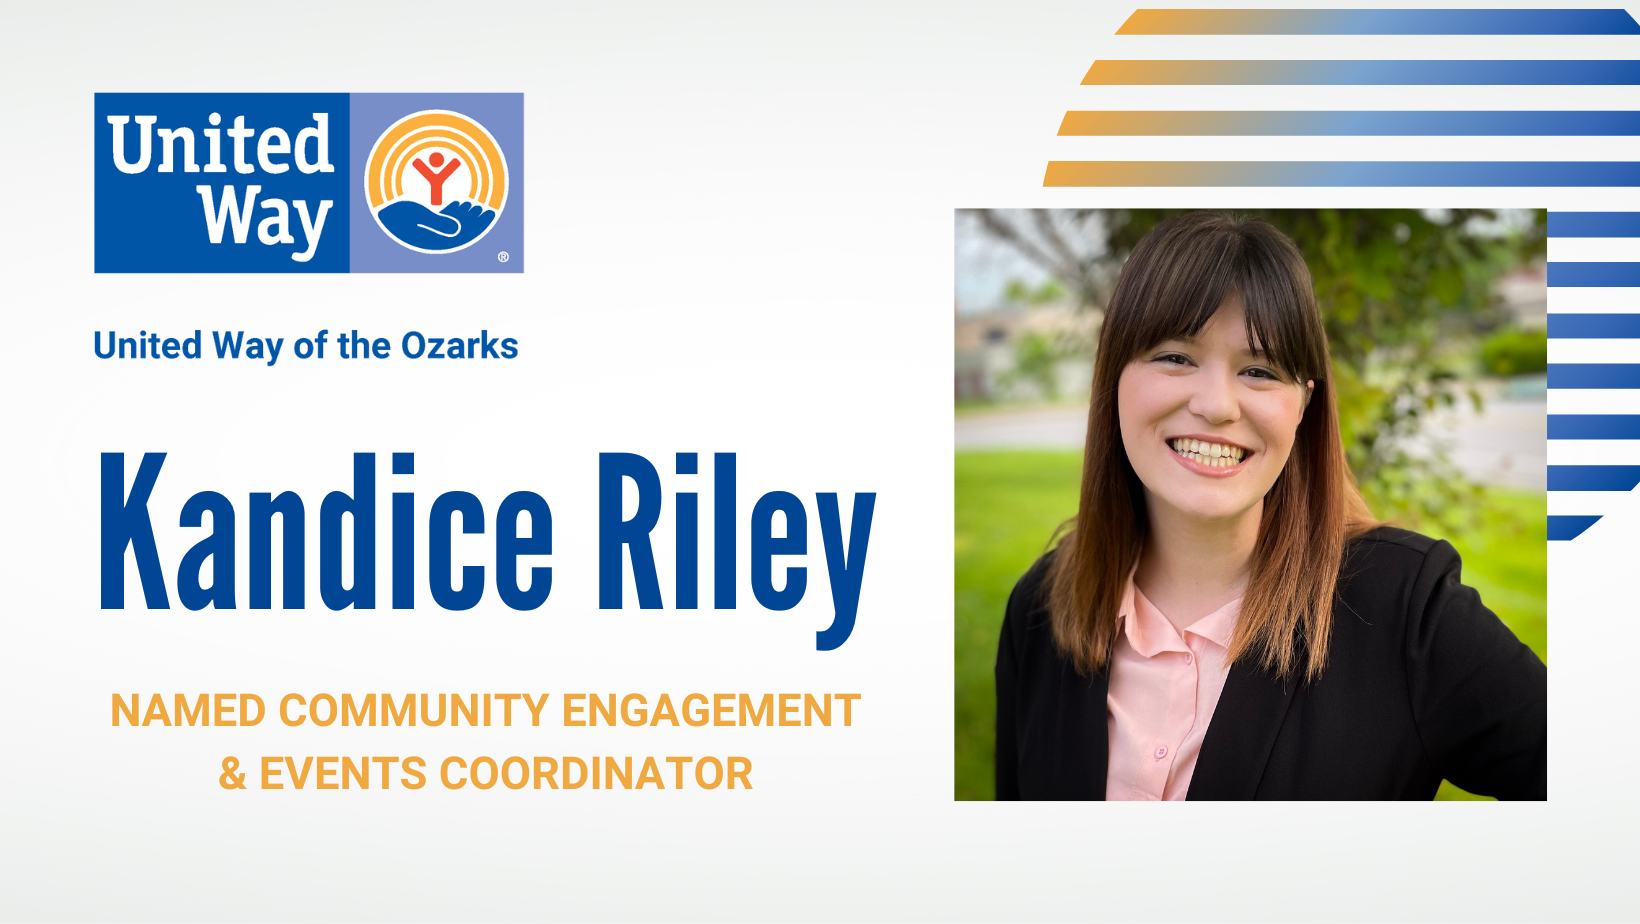 Featured image for “Kandice Riley named Community Engagement & Events Coordinator”